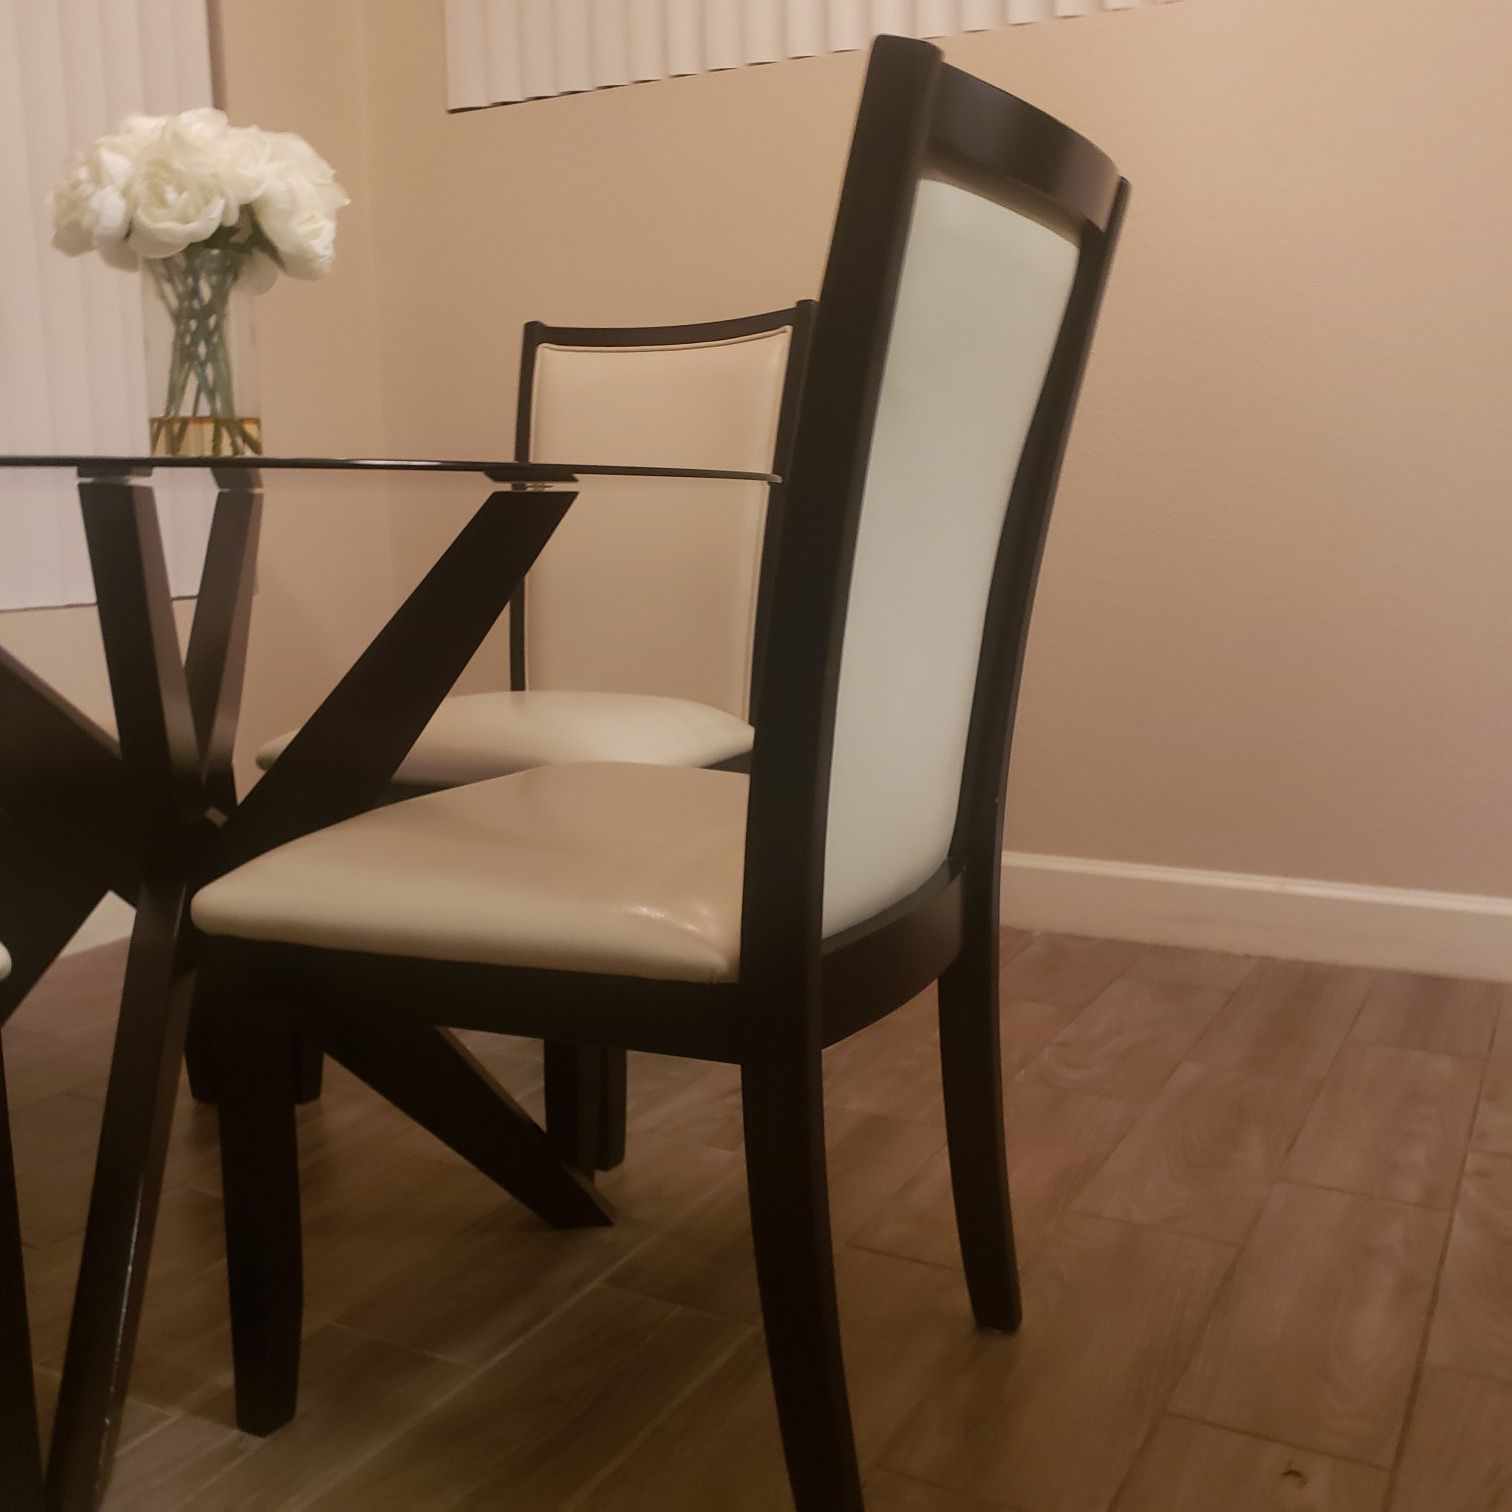 Dining table set with all 4 chairs